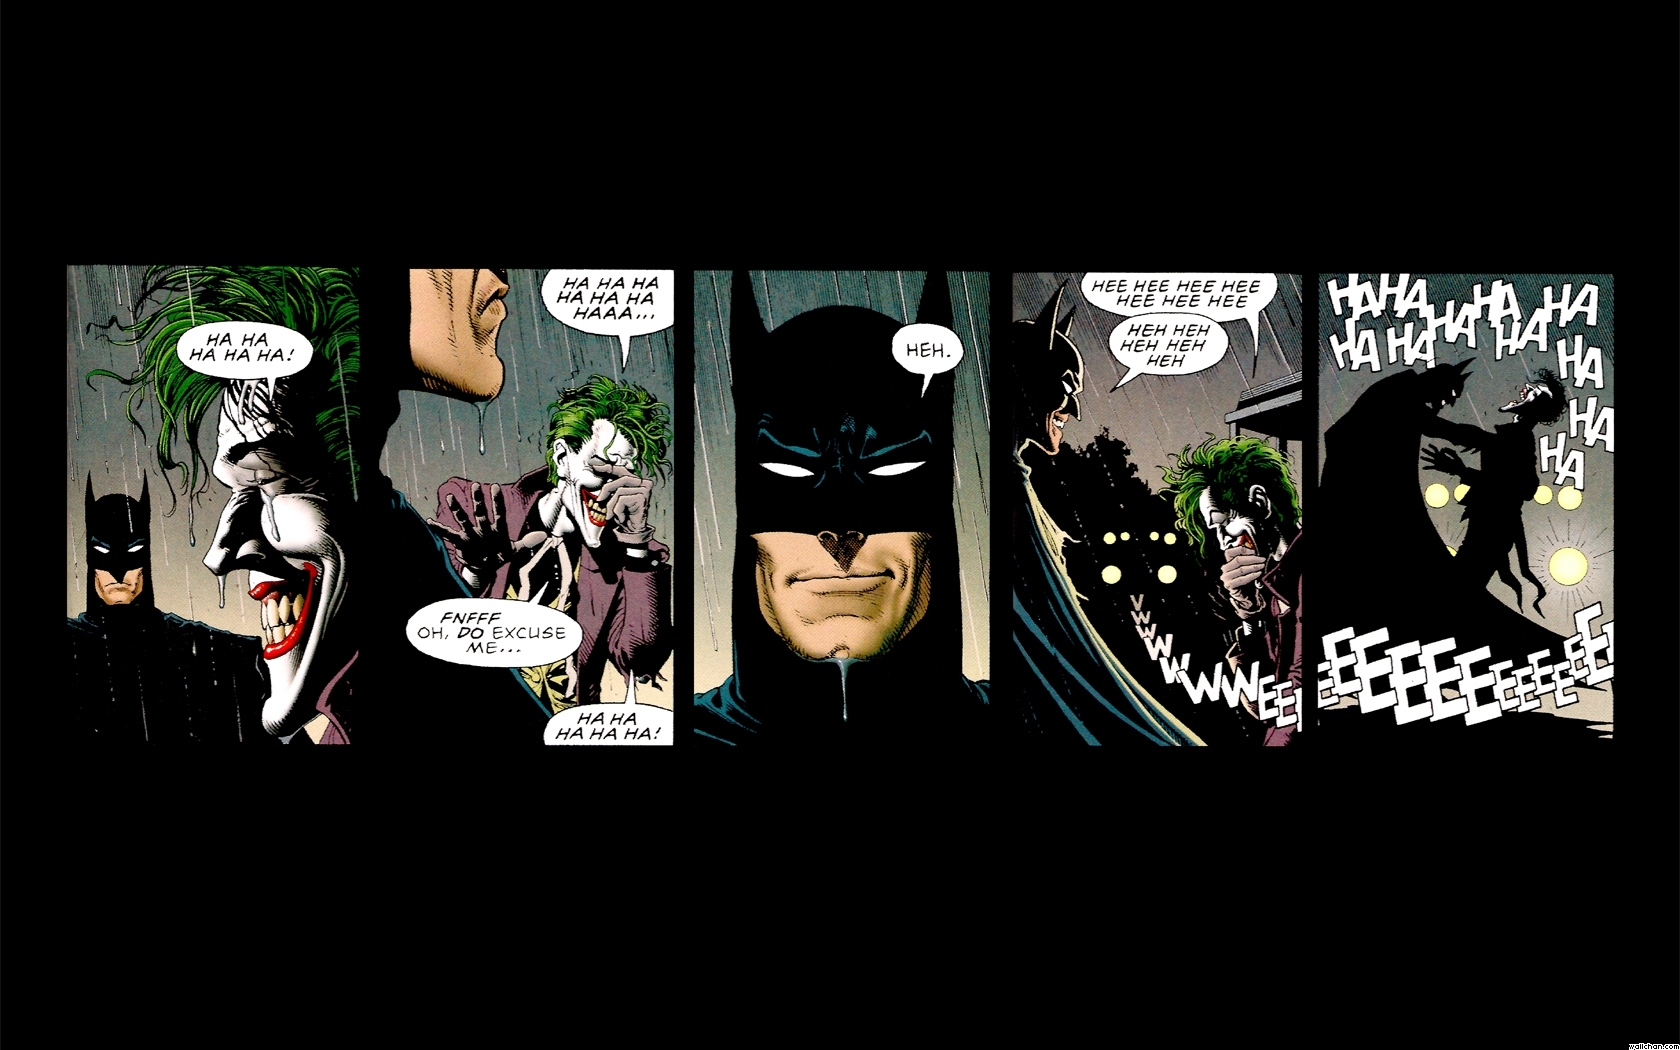 The final ambiguous panel of the legendary Killing Joke possibly 1680x1050